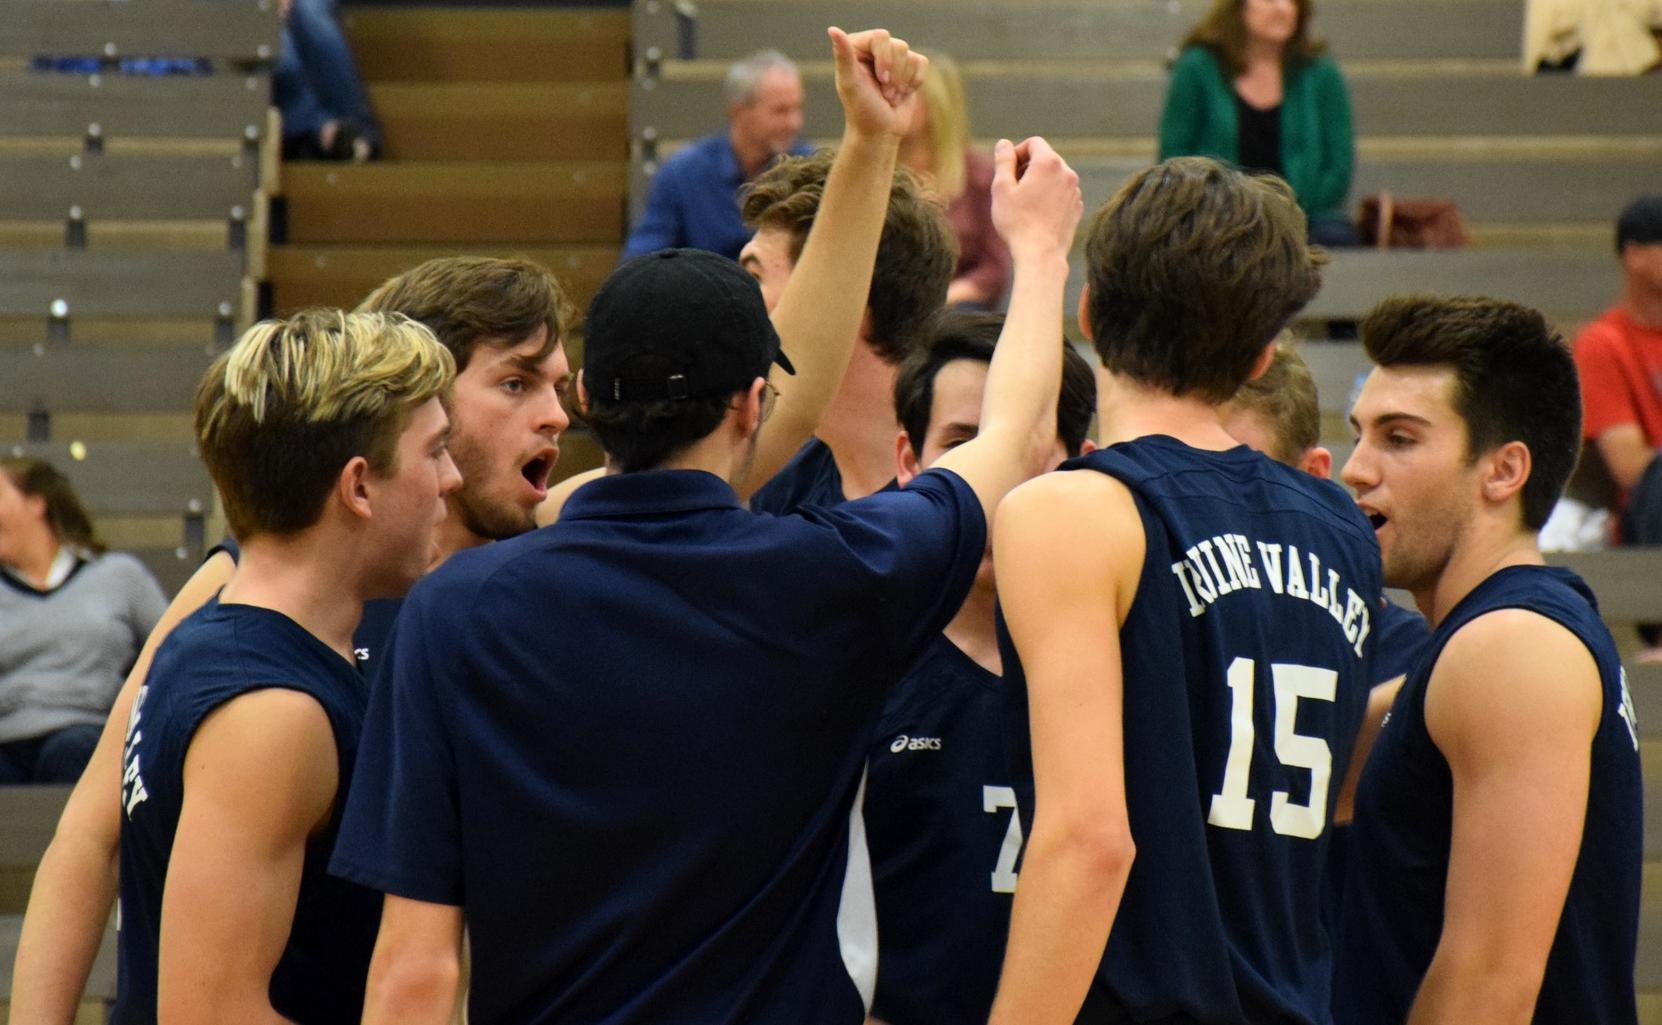 Men's volleyball team at the top of the state poll once again